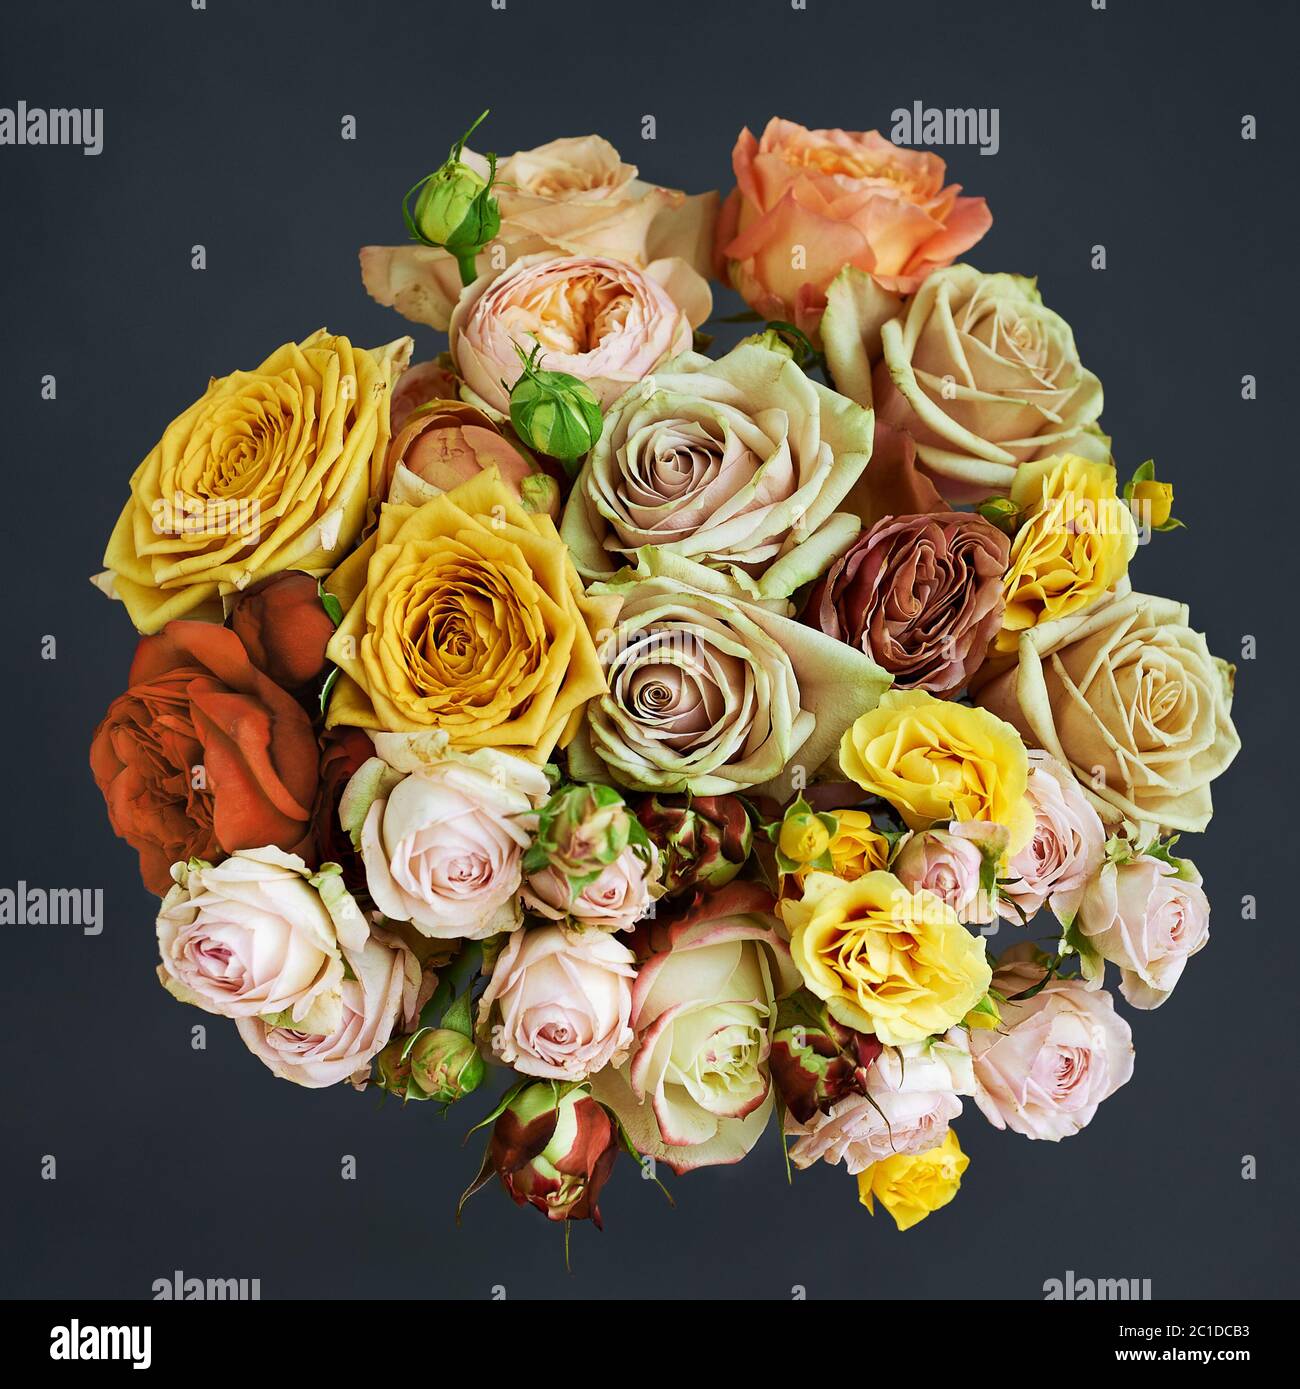 Bouquet of beautiful rose flowers. Top view on a dark background. Stock Photo